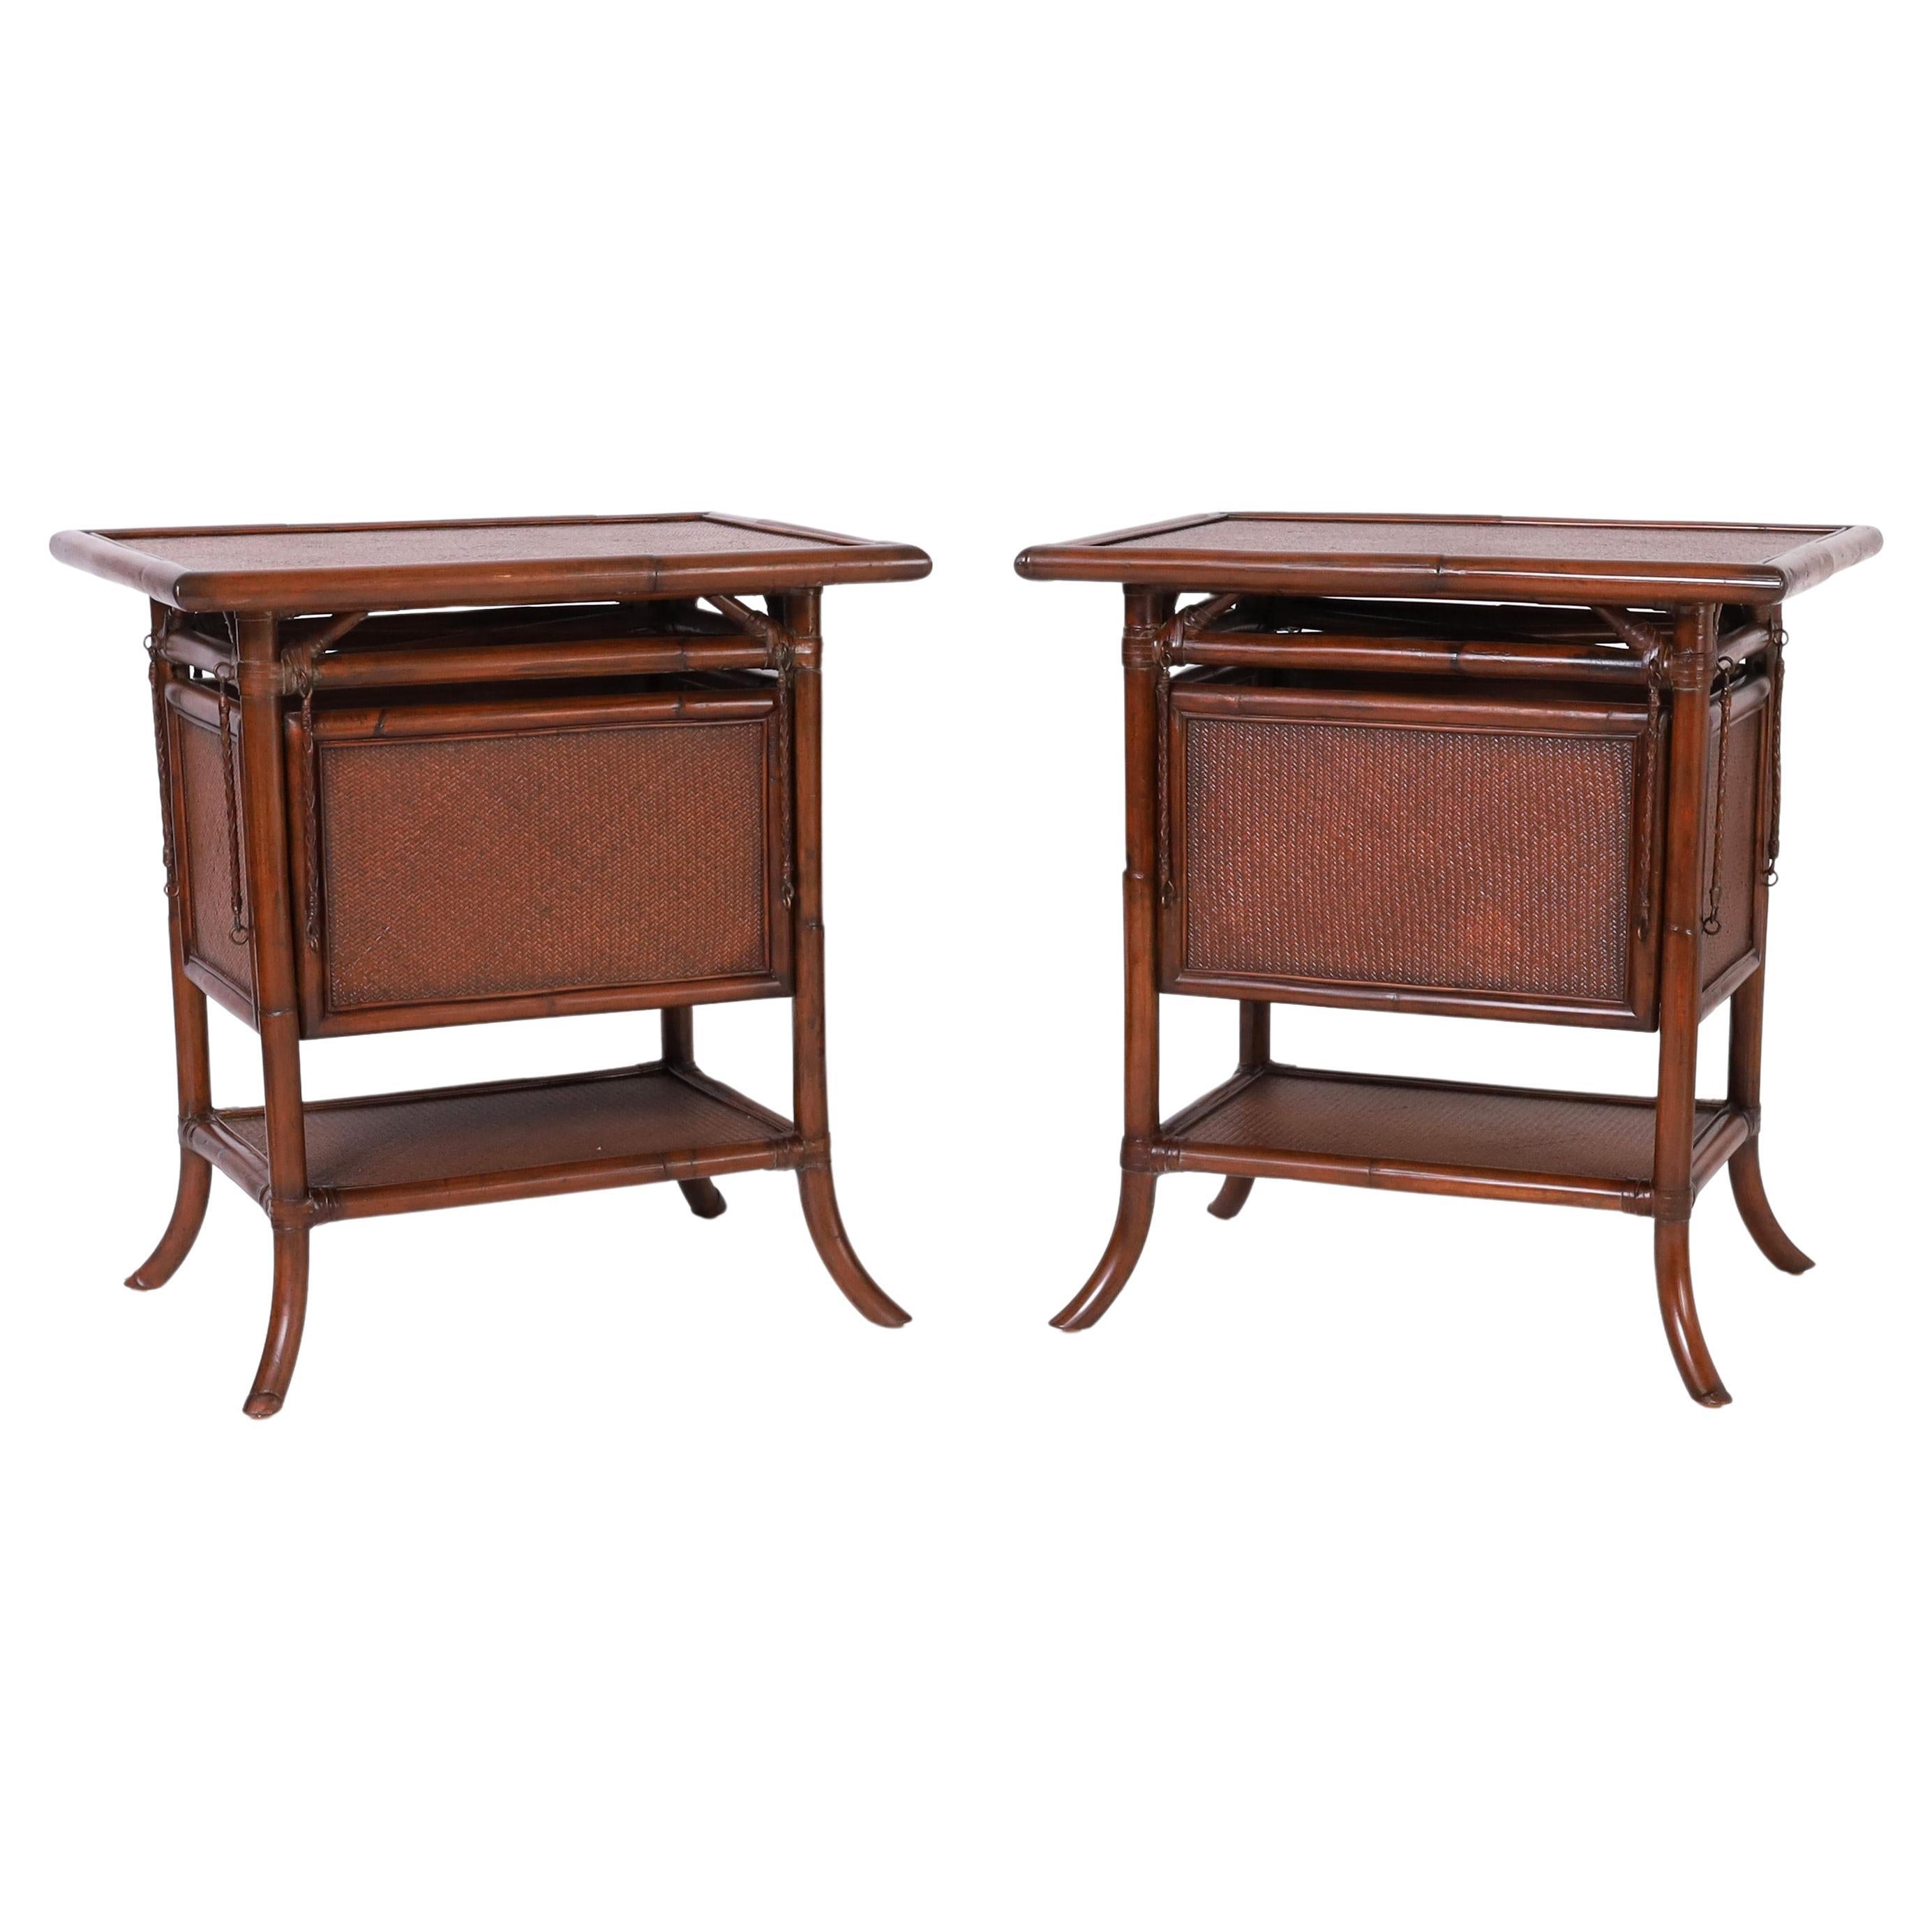 British Colonial Style Pair of Bamboo and Grasscloth Stands or Tables For Sale